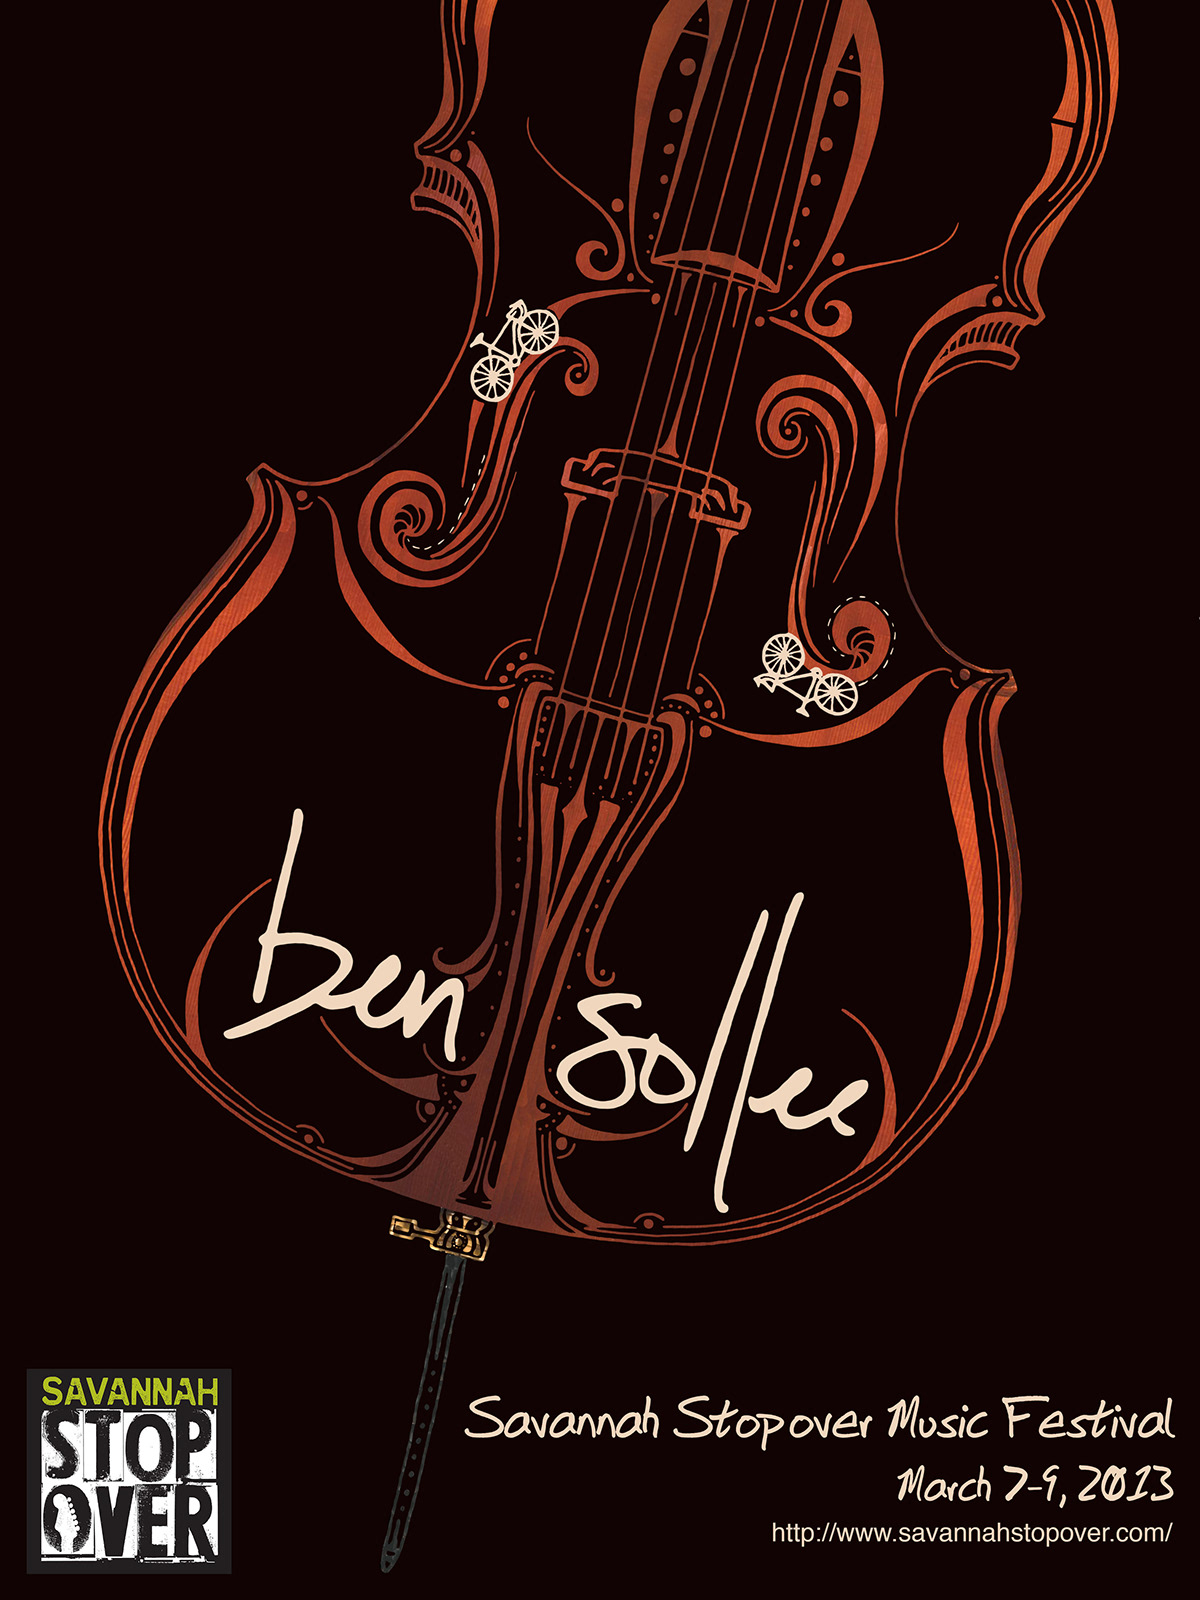 poster cello bycicles ben sollee